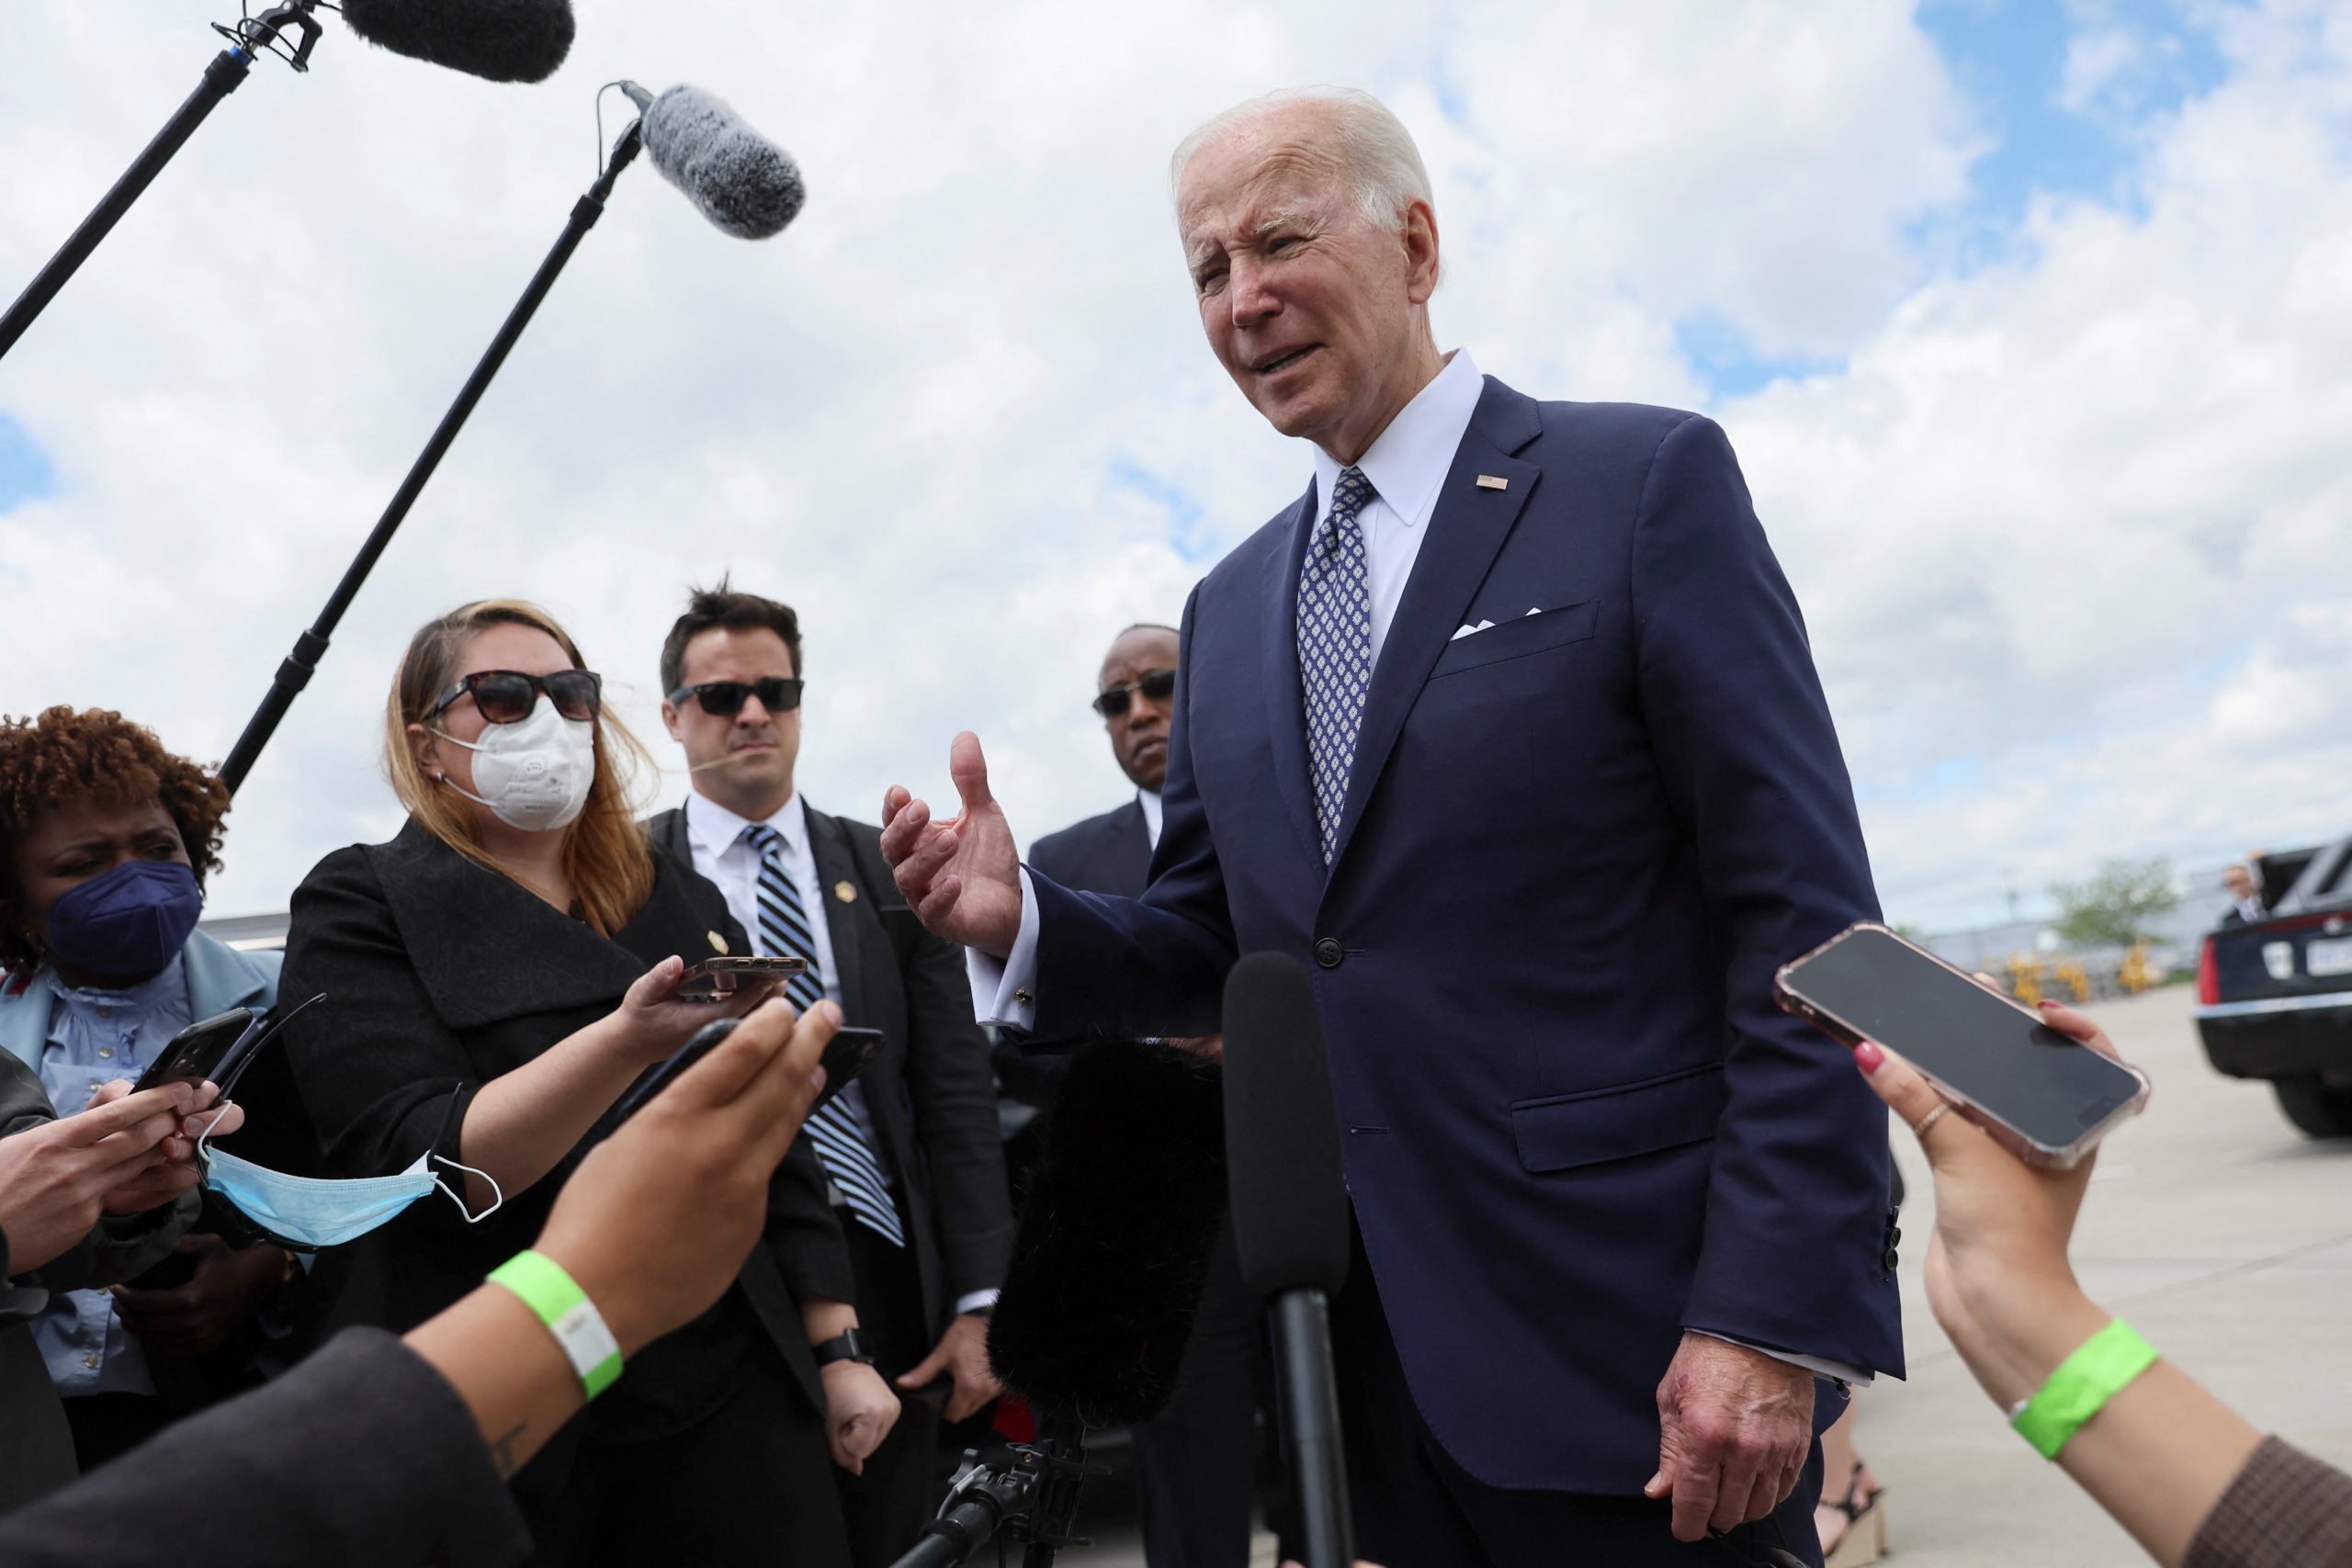 U.S. President Joe Biden speaks with members of the media, before departing Buffalo-Niagara International Airport, after visiting the area to pay his respects to the people killed in a mass shooting by a gunman authorities say was motivated by racism, in Buffalo, NY, U.S. May 17, 2022. REUTERS/Leah Millis